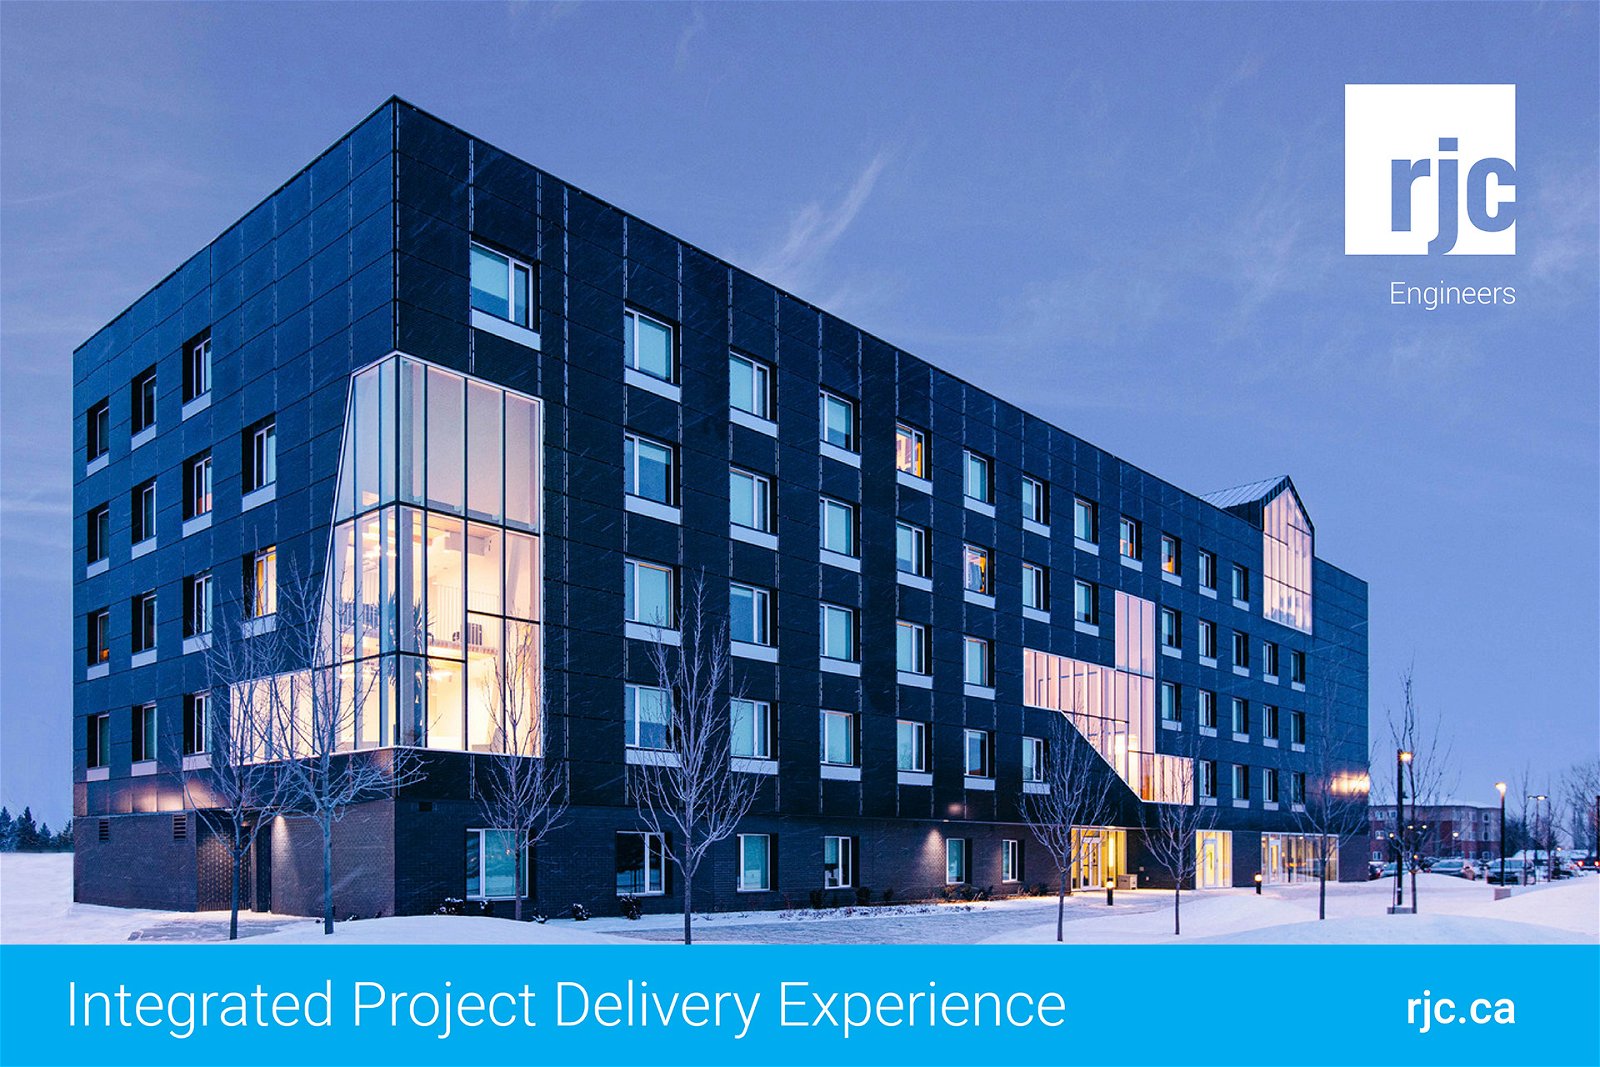 RJC Engineers Integrated Project Delivery Experience